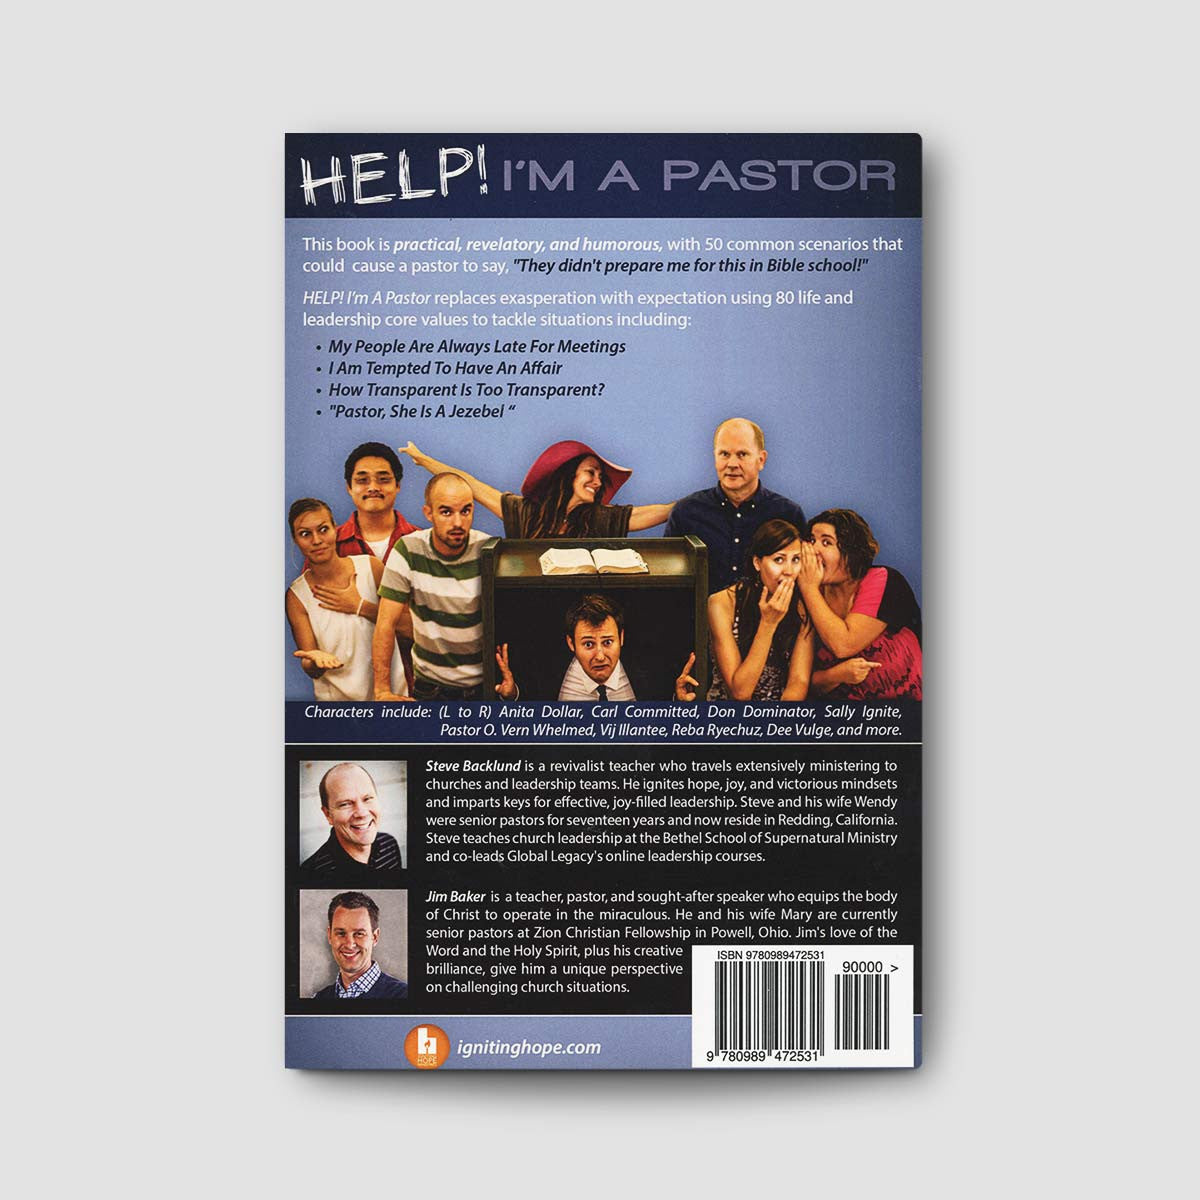 Help! I'm a Pastor: Practical Wisdom for Church Leaders